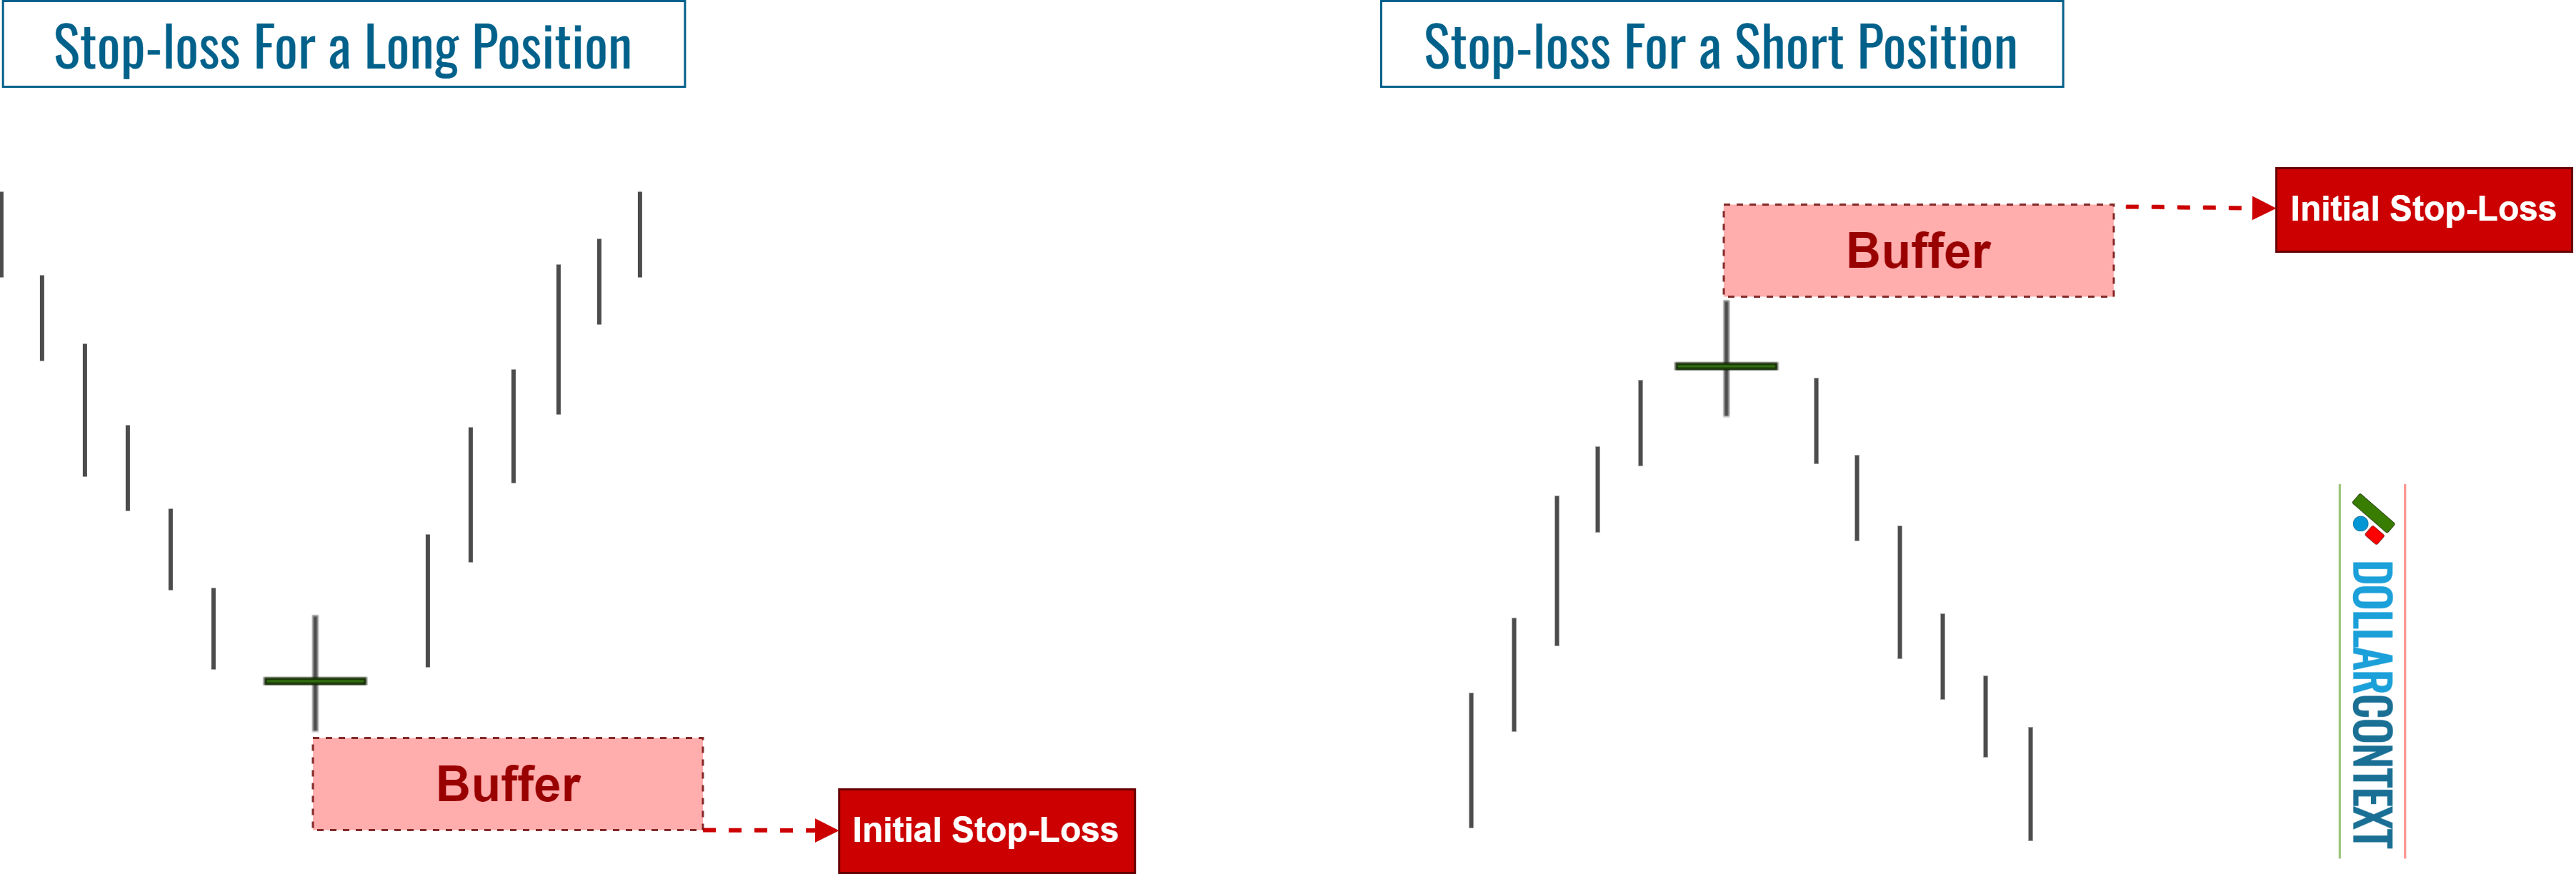 Adding a Buffer to the Stop-loss of a Doji Strategy